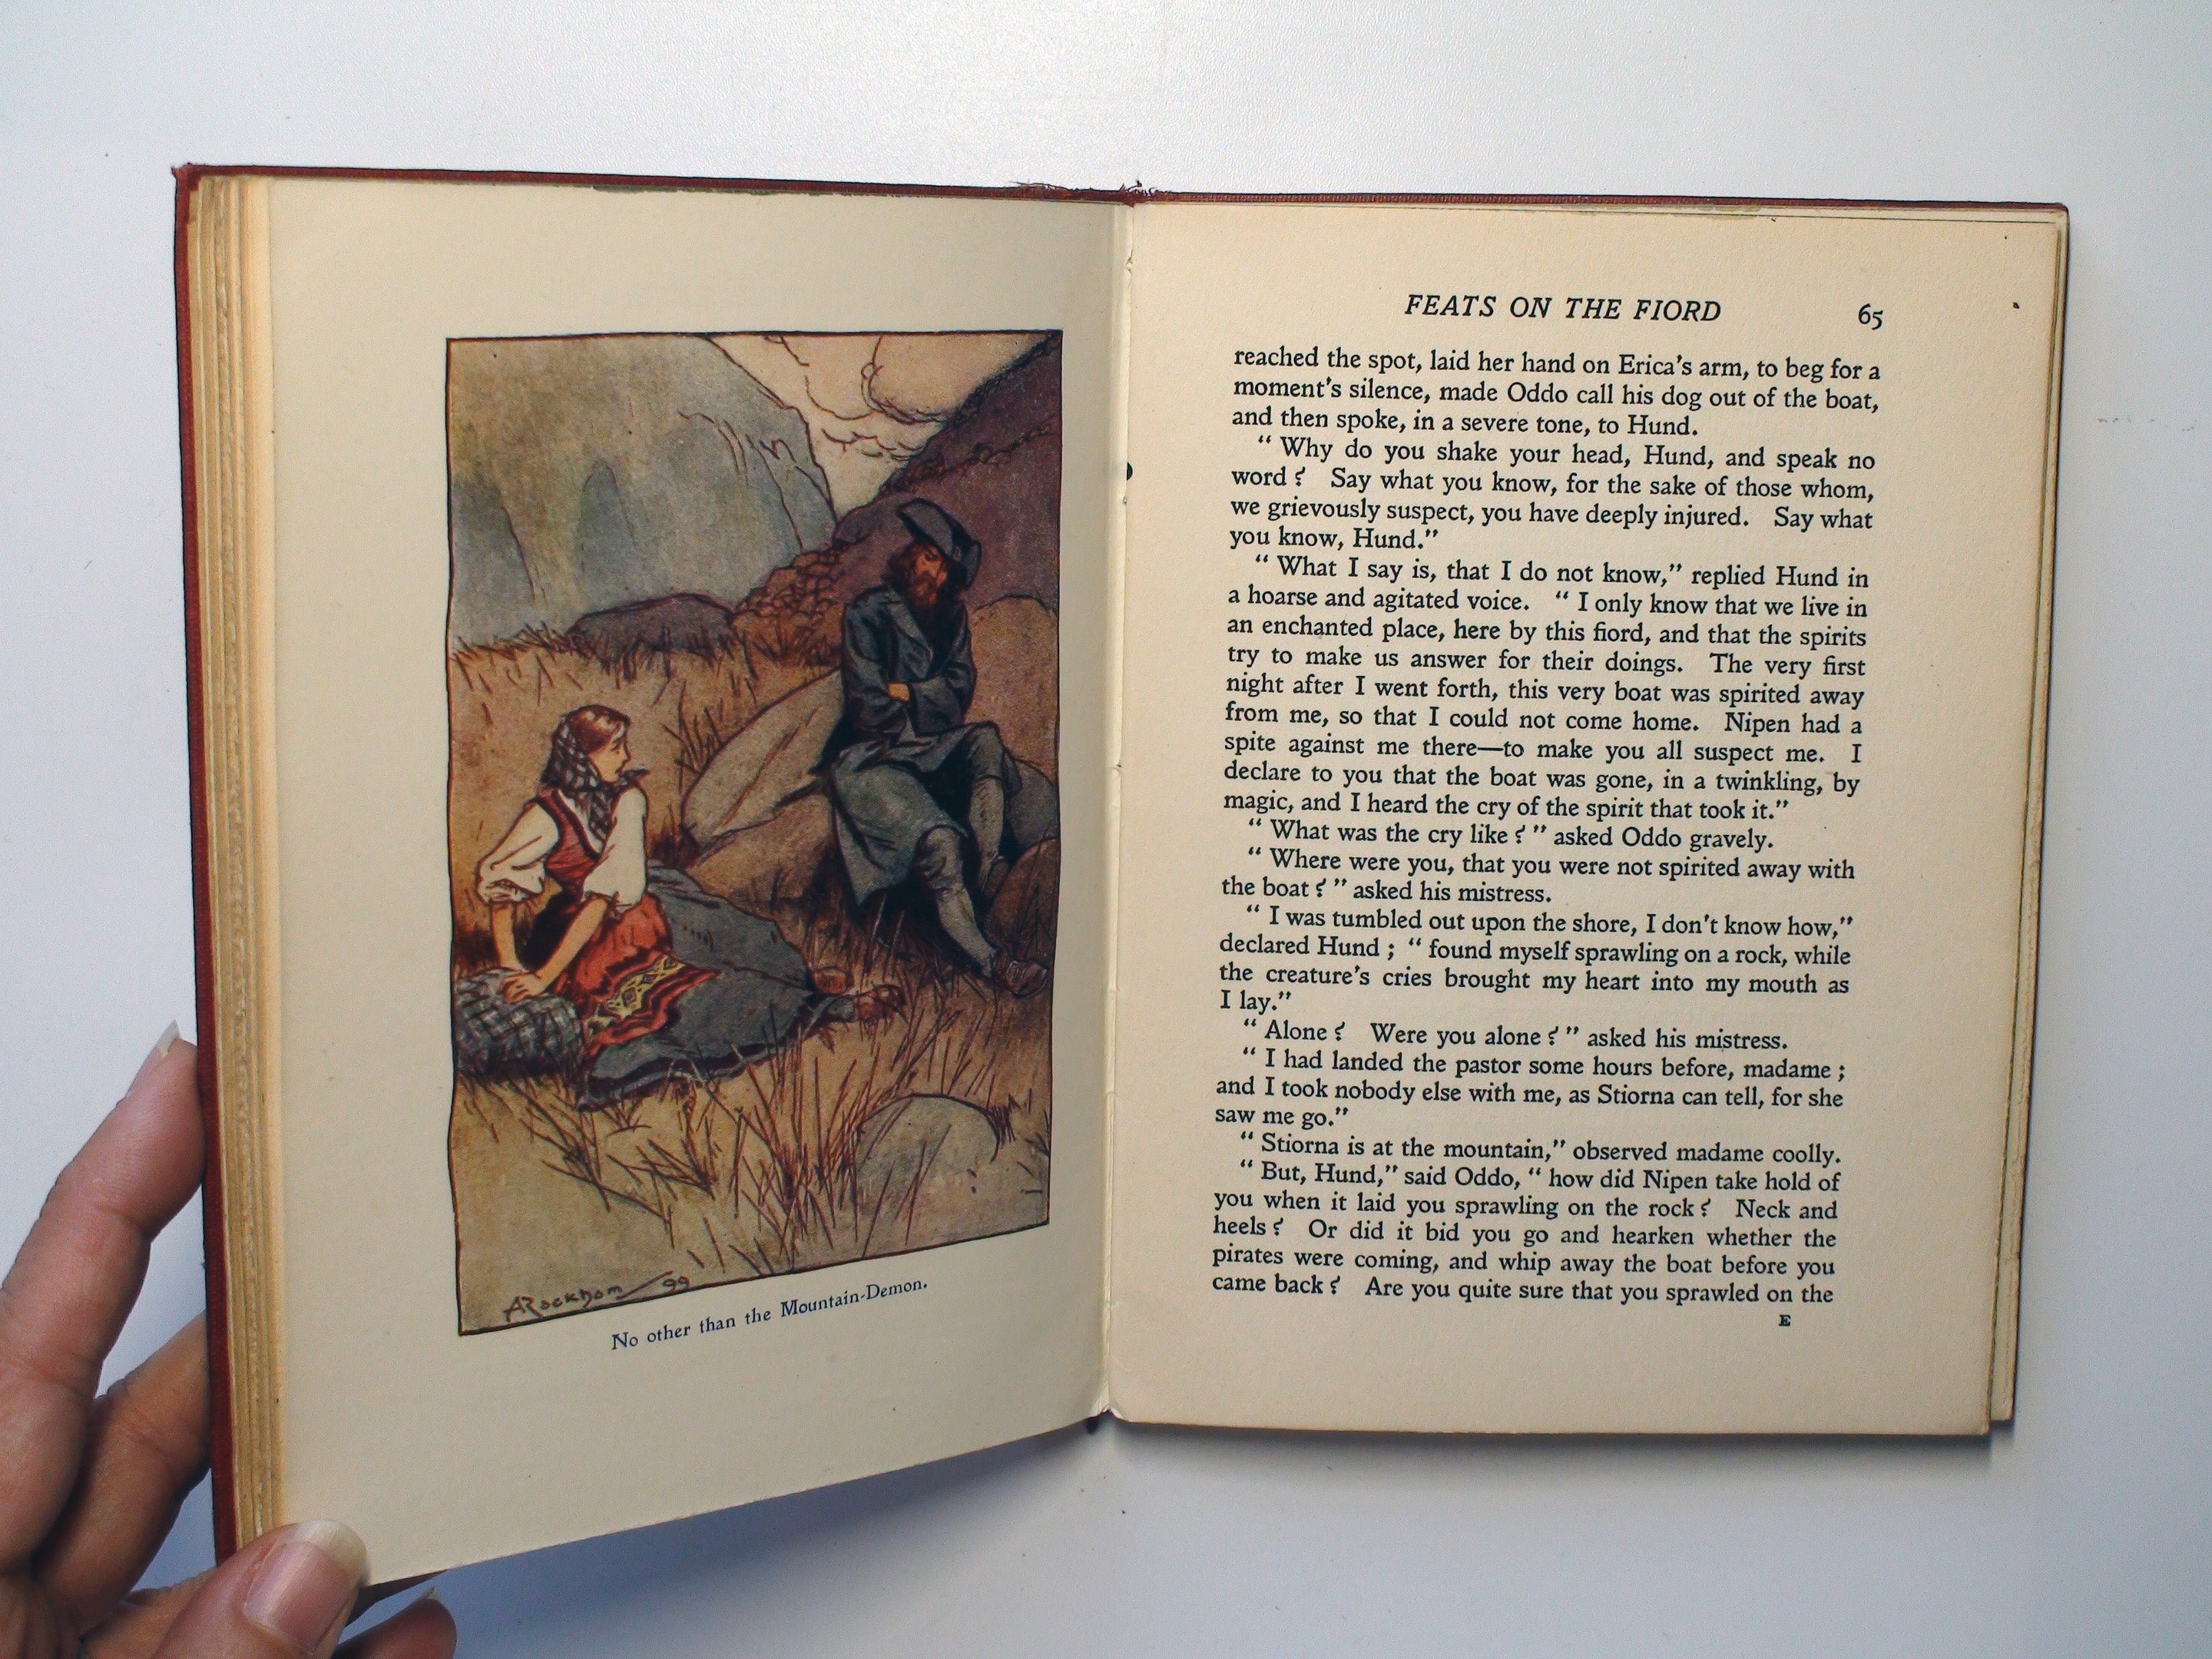 Feats On The Fjords by Harriet Martineau, Illustrated by Arthur Rackham, 1914